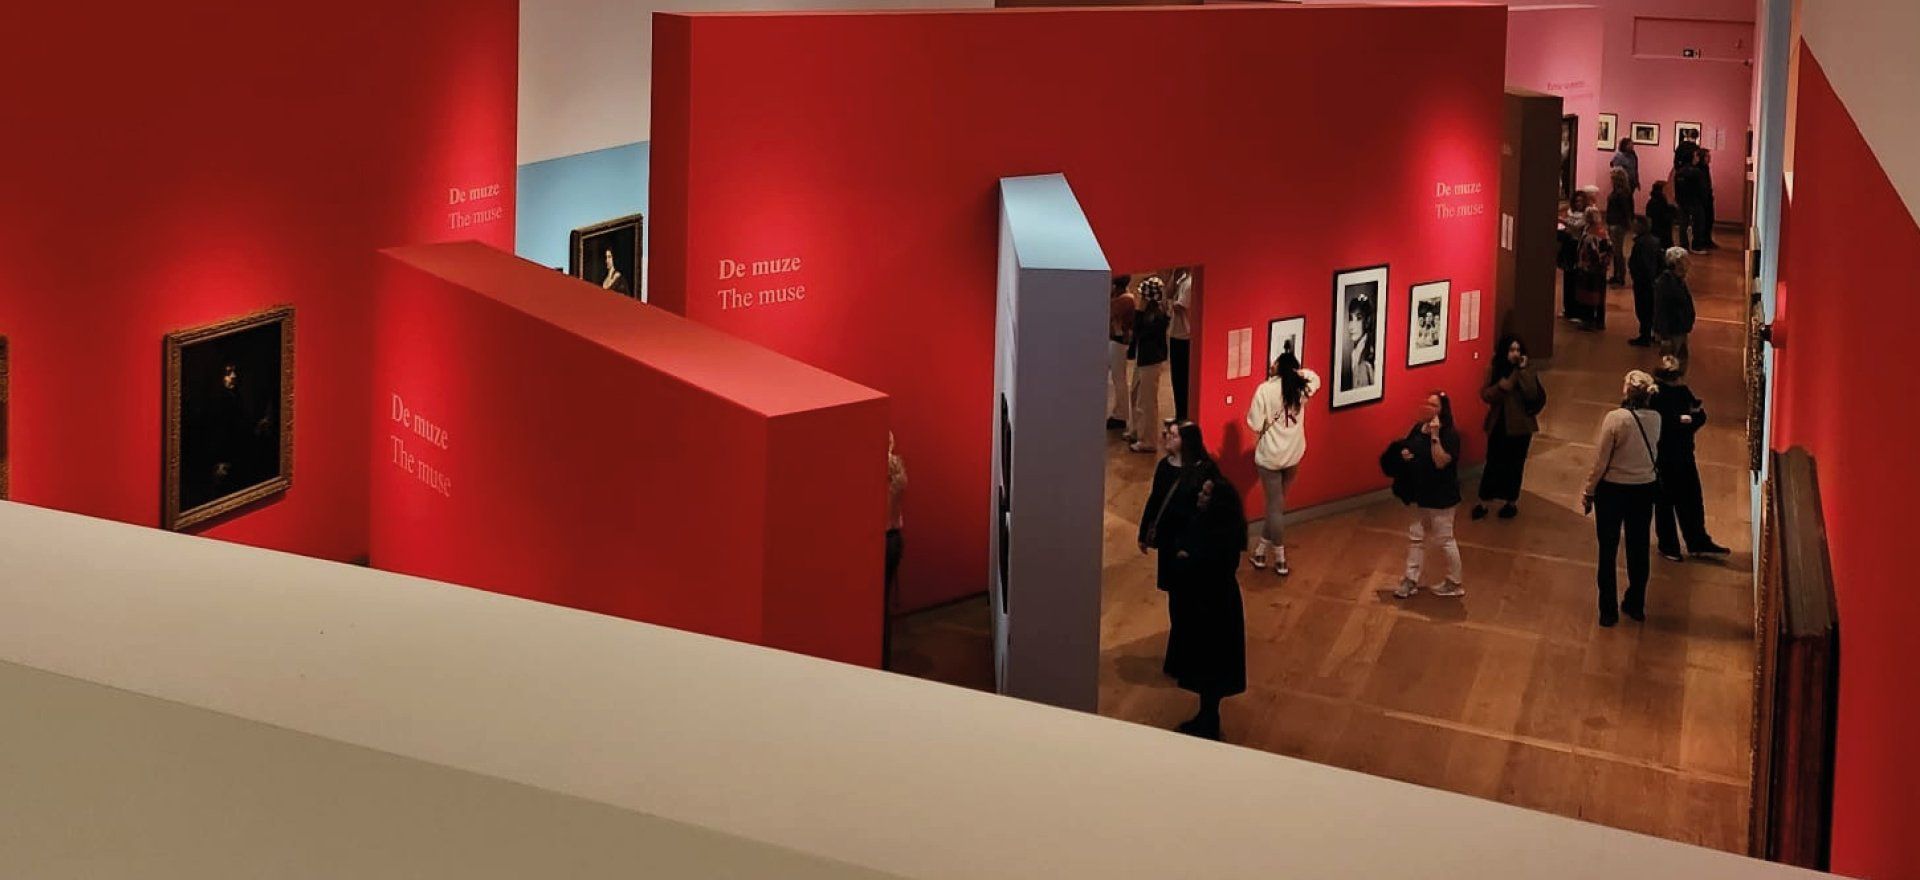 A slight bird eye view of people walking through a museum in a red room